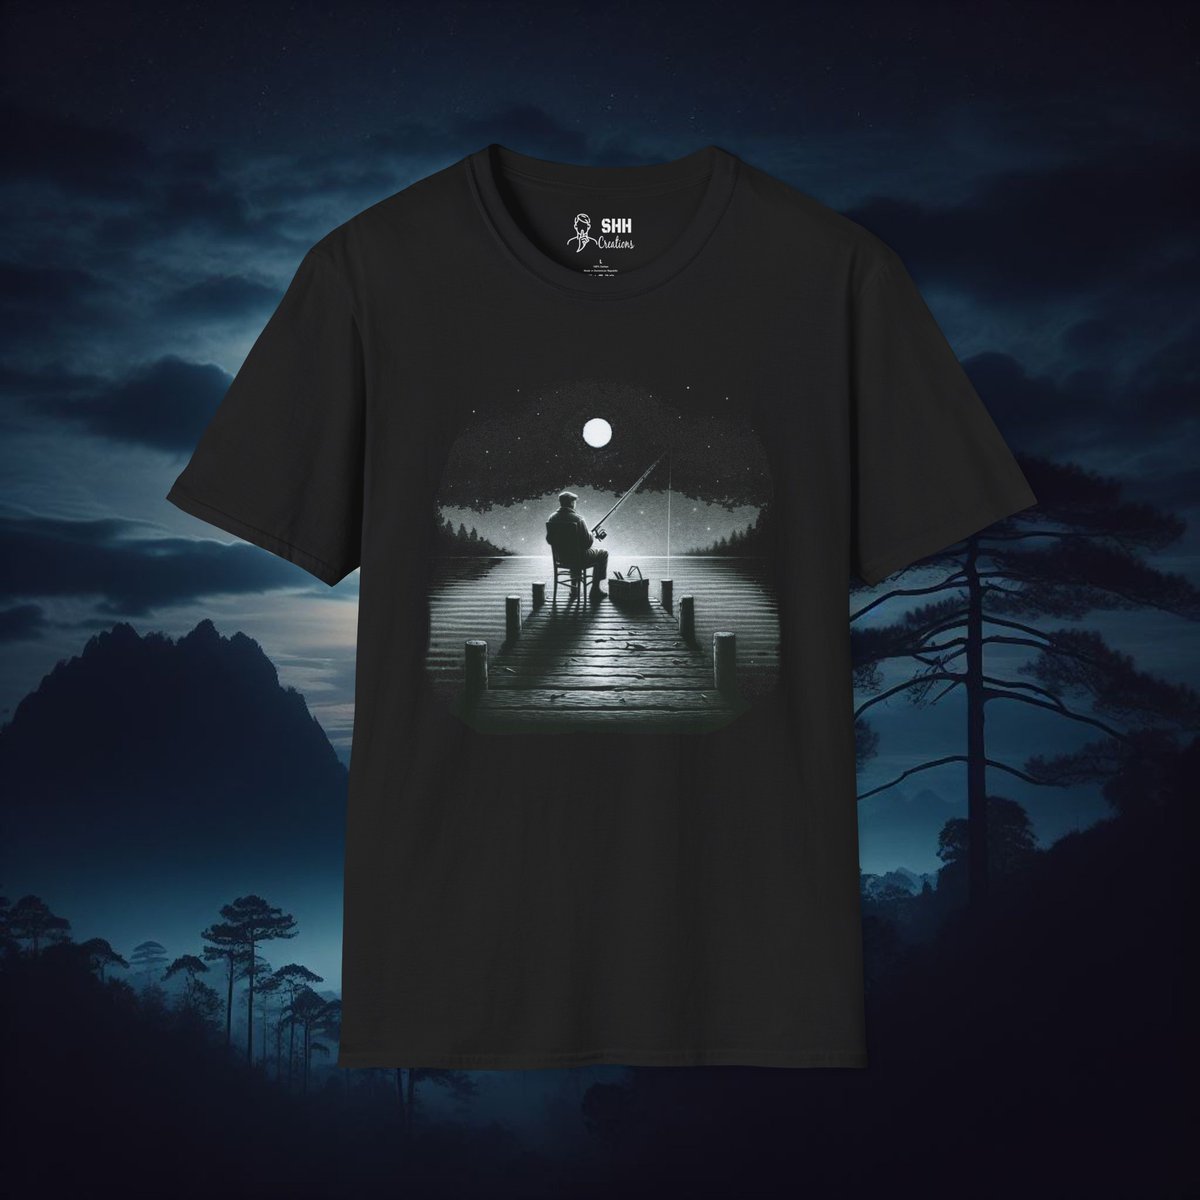 Ready to cast your line into the night? 🌙🎣 Our Nighttime Fisherman T-Shirt captures the serene pleasure of lake fishing under the stars. #QuietMoments #FishingUnderTheMoon #NightAngler

shhcreations.com/products/night…